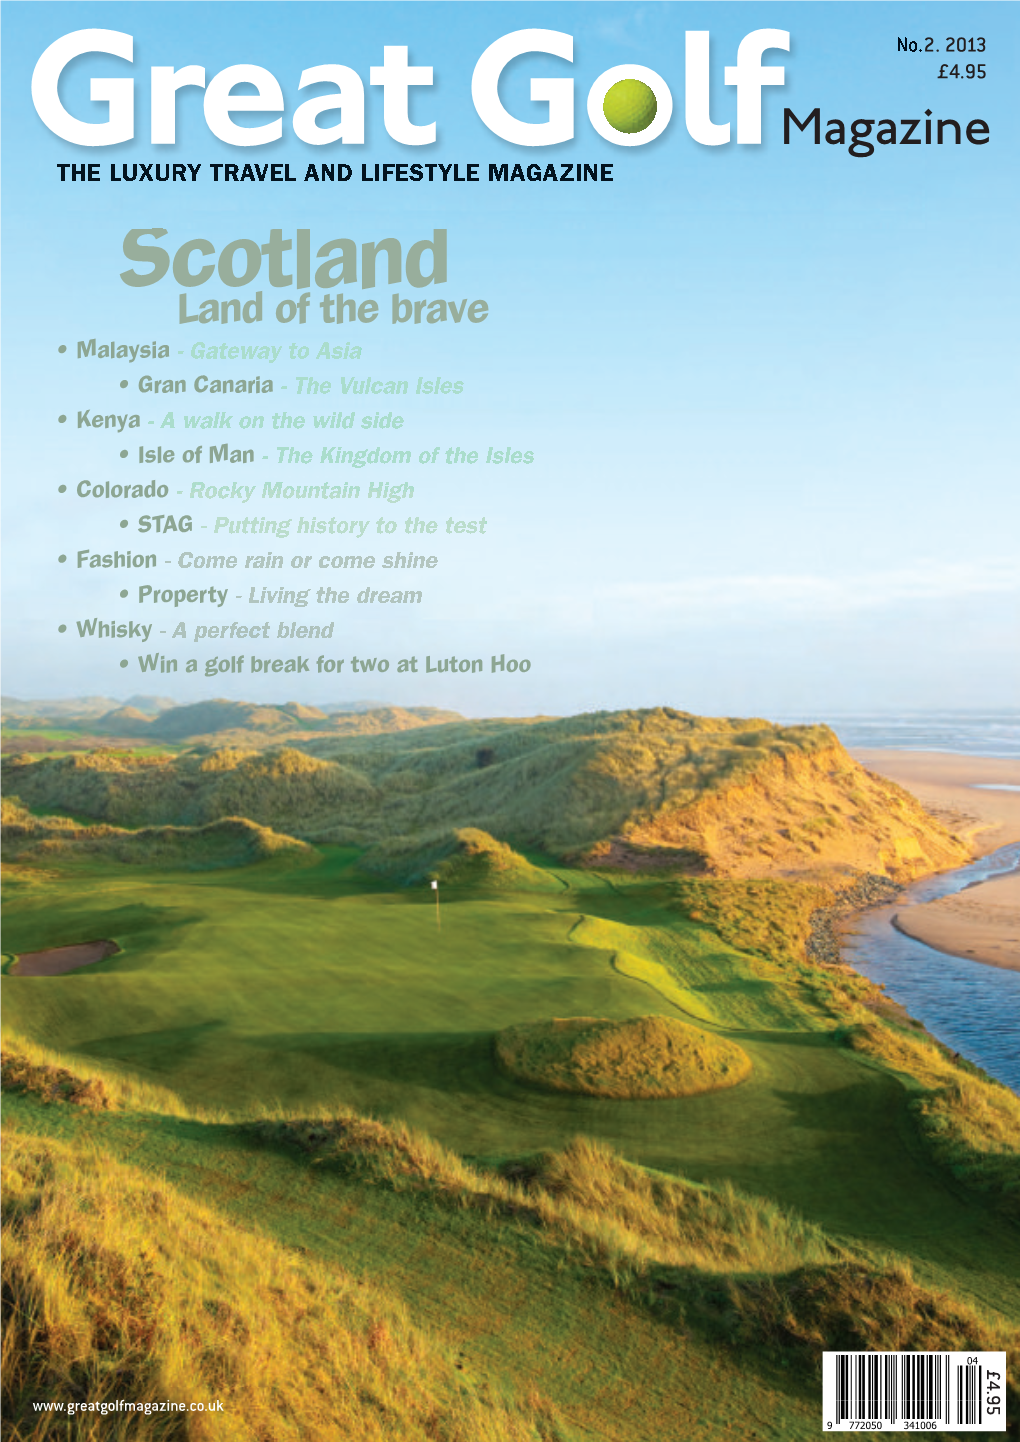 Scotland Land of the Brave • Malaysia • Gran Canaria • Kenya • Isle of Man • Colorado • STAG • Fashion • Property • Whisky • Win a Golf Break for Two at Luton Hoo